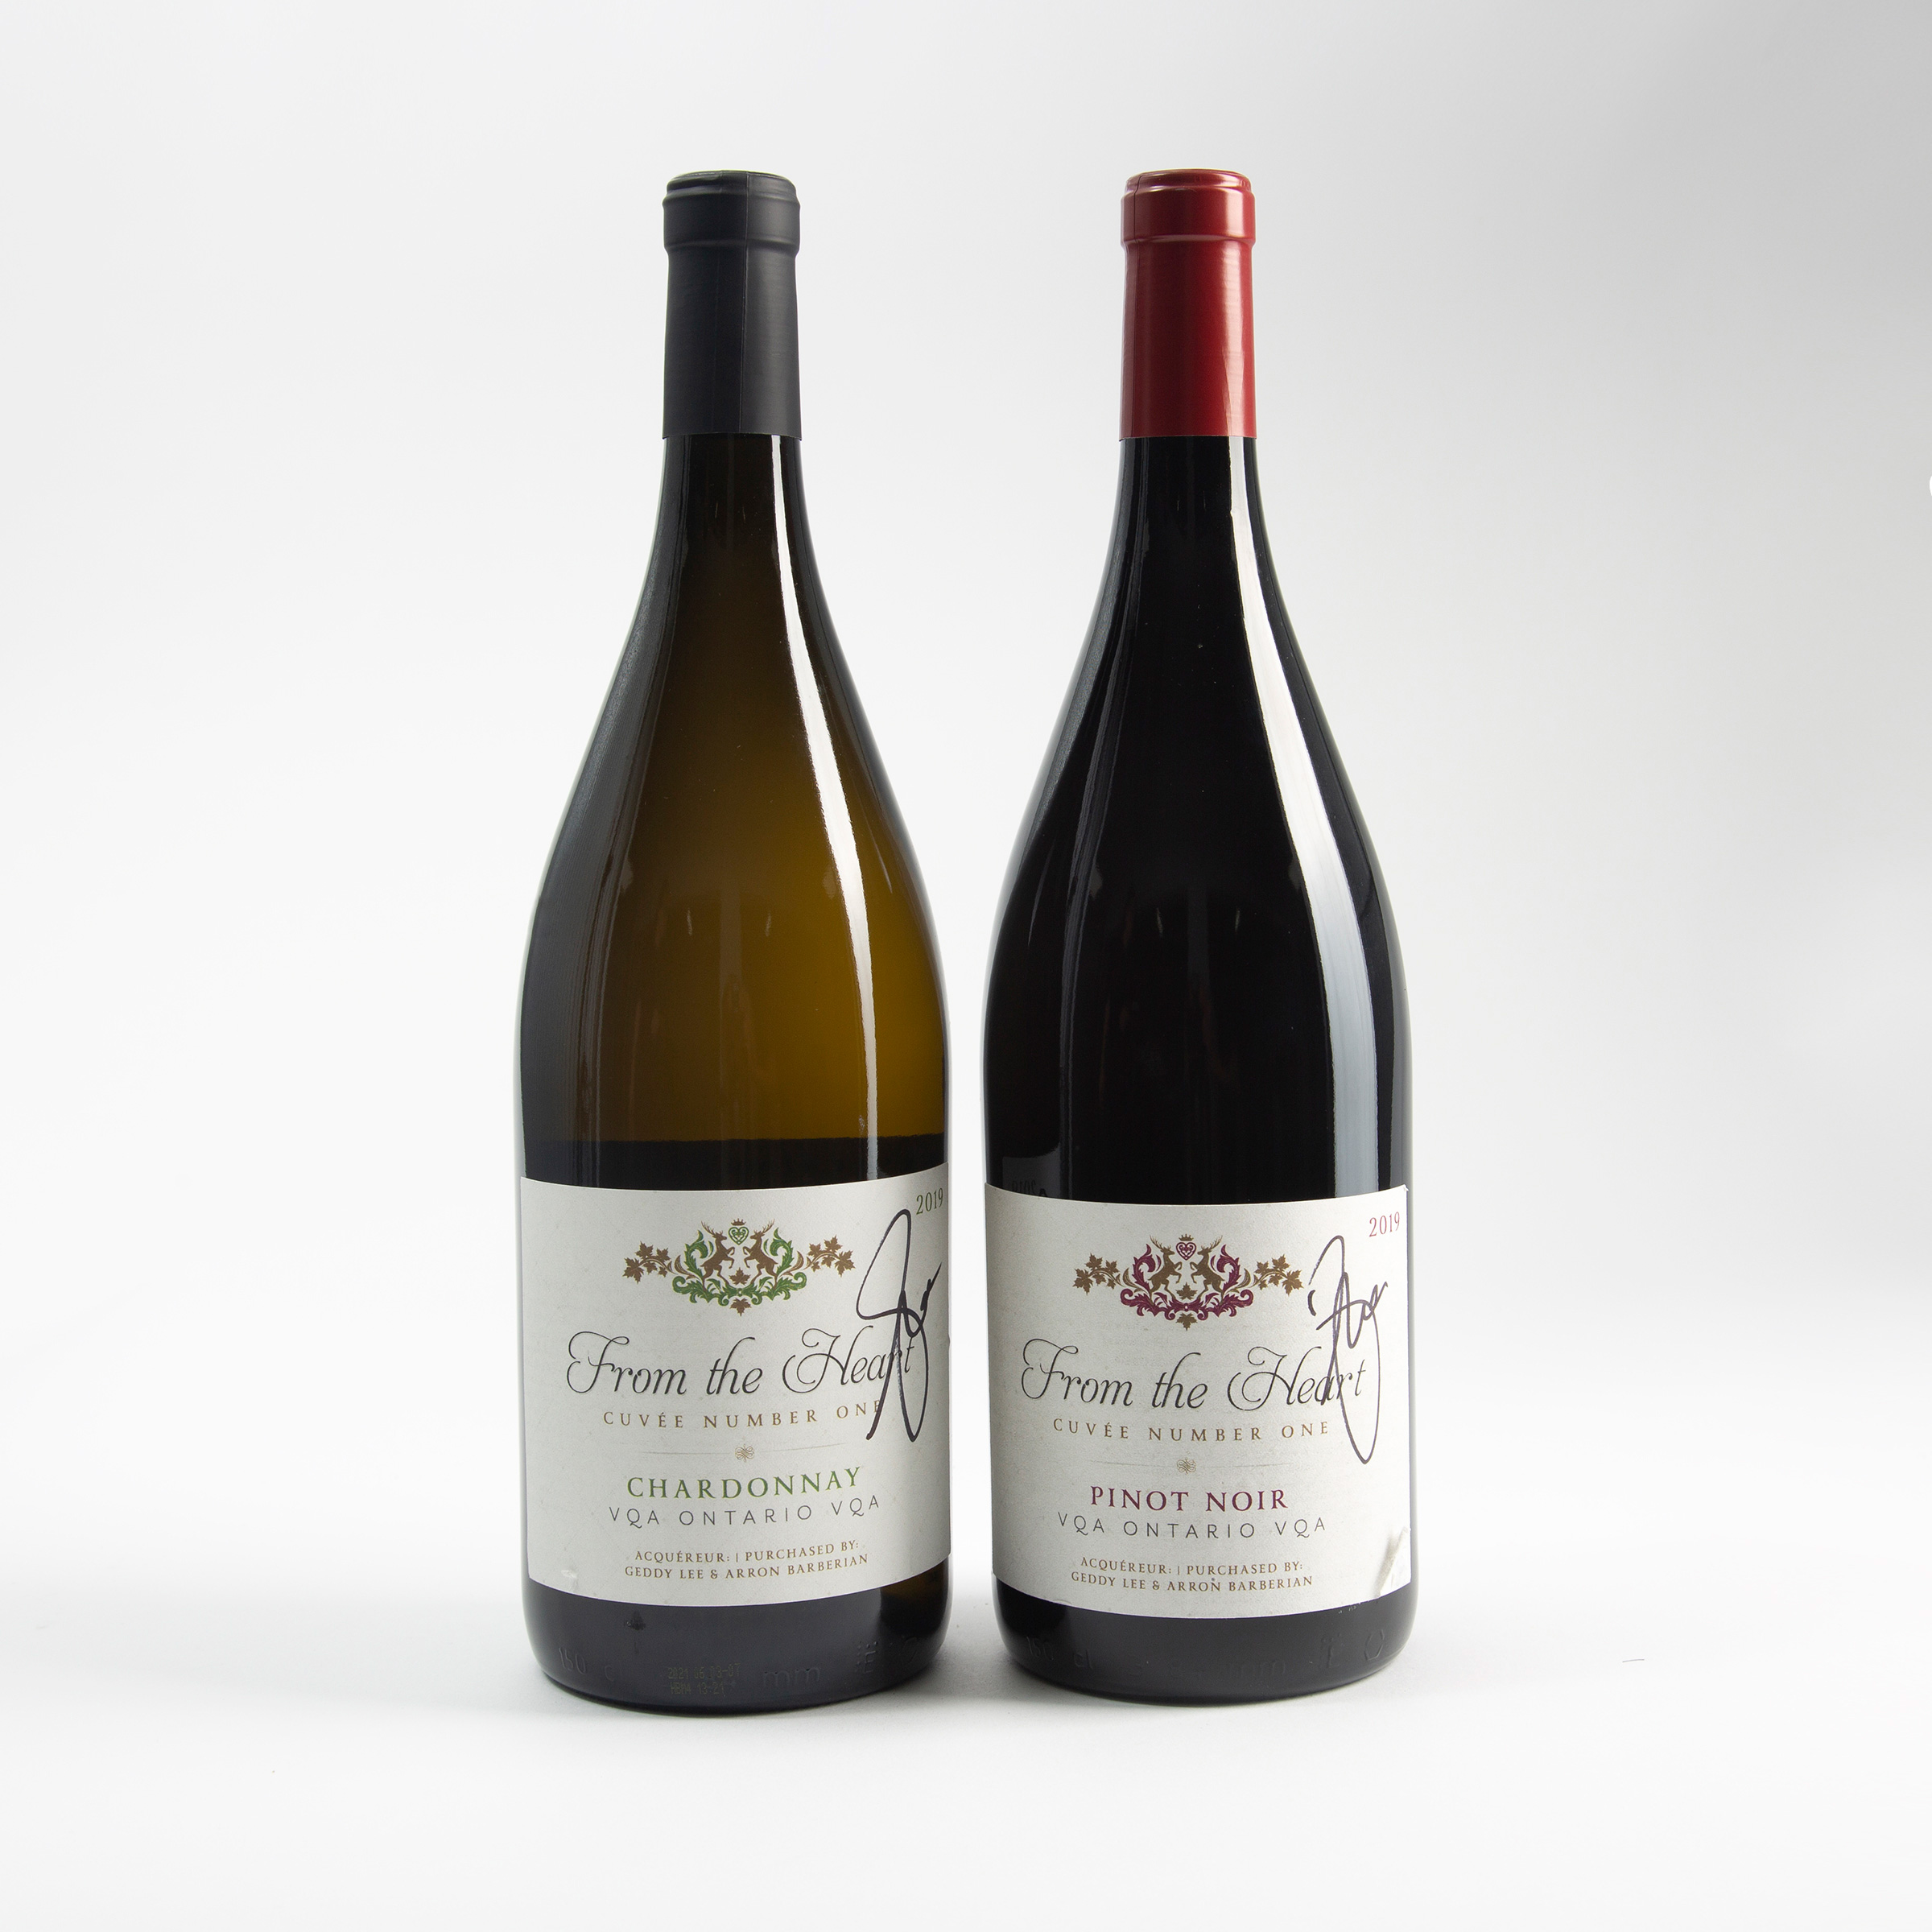 FROM THE HEART CUVÉE NUMBER ONE CHARDONNAY 2019 (1 MAG.)
FROM THE HEART CUVÉE NUMBER ONE PINOT NOIR 2019 (1 MAG.)